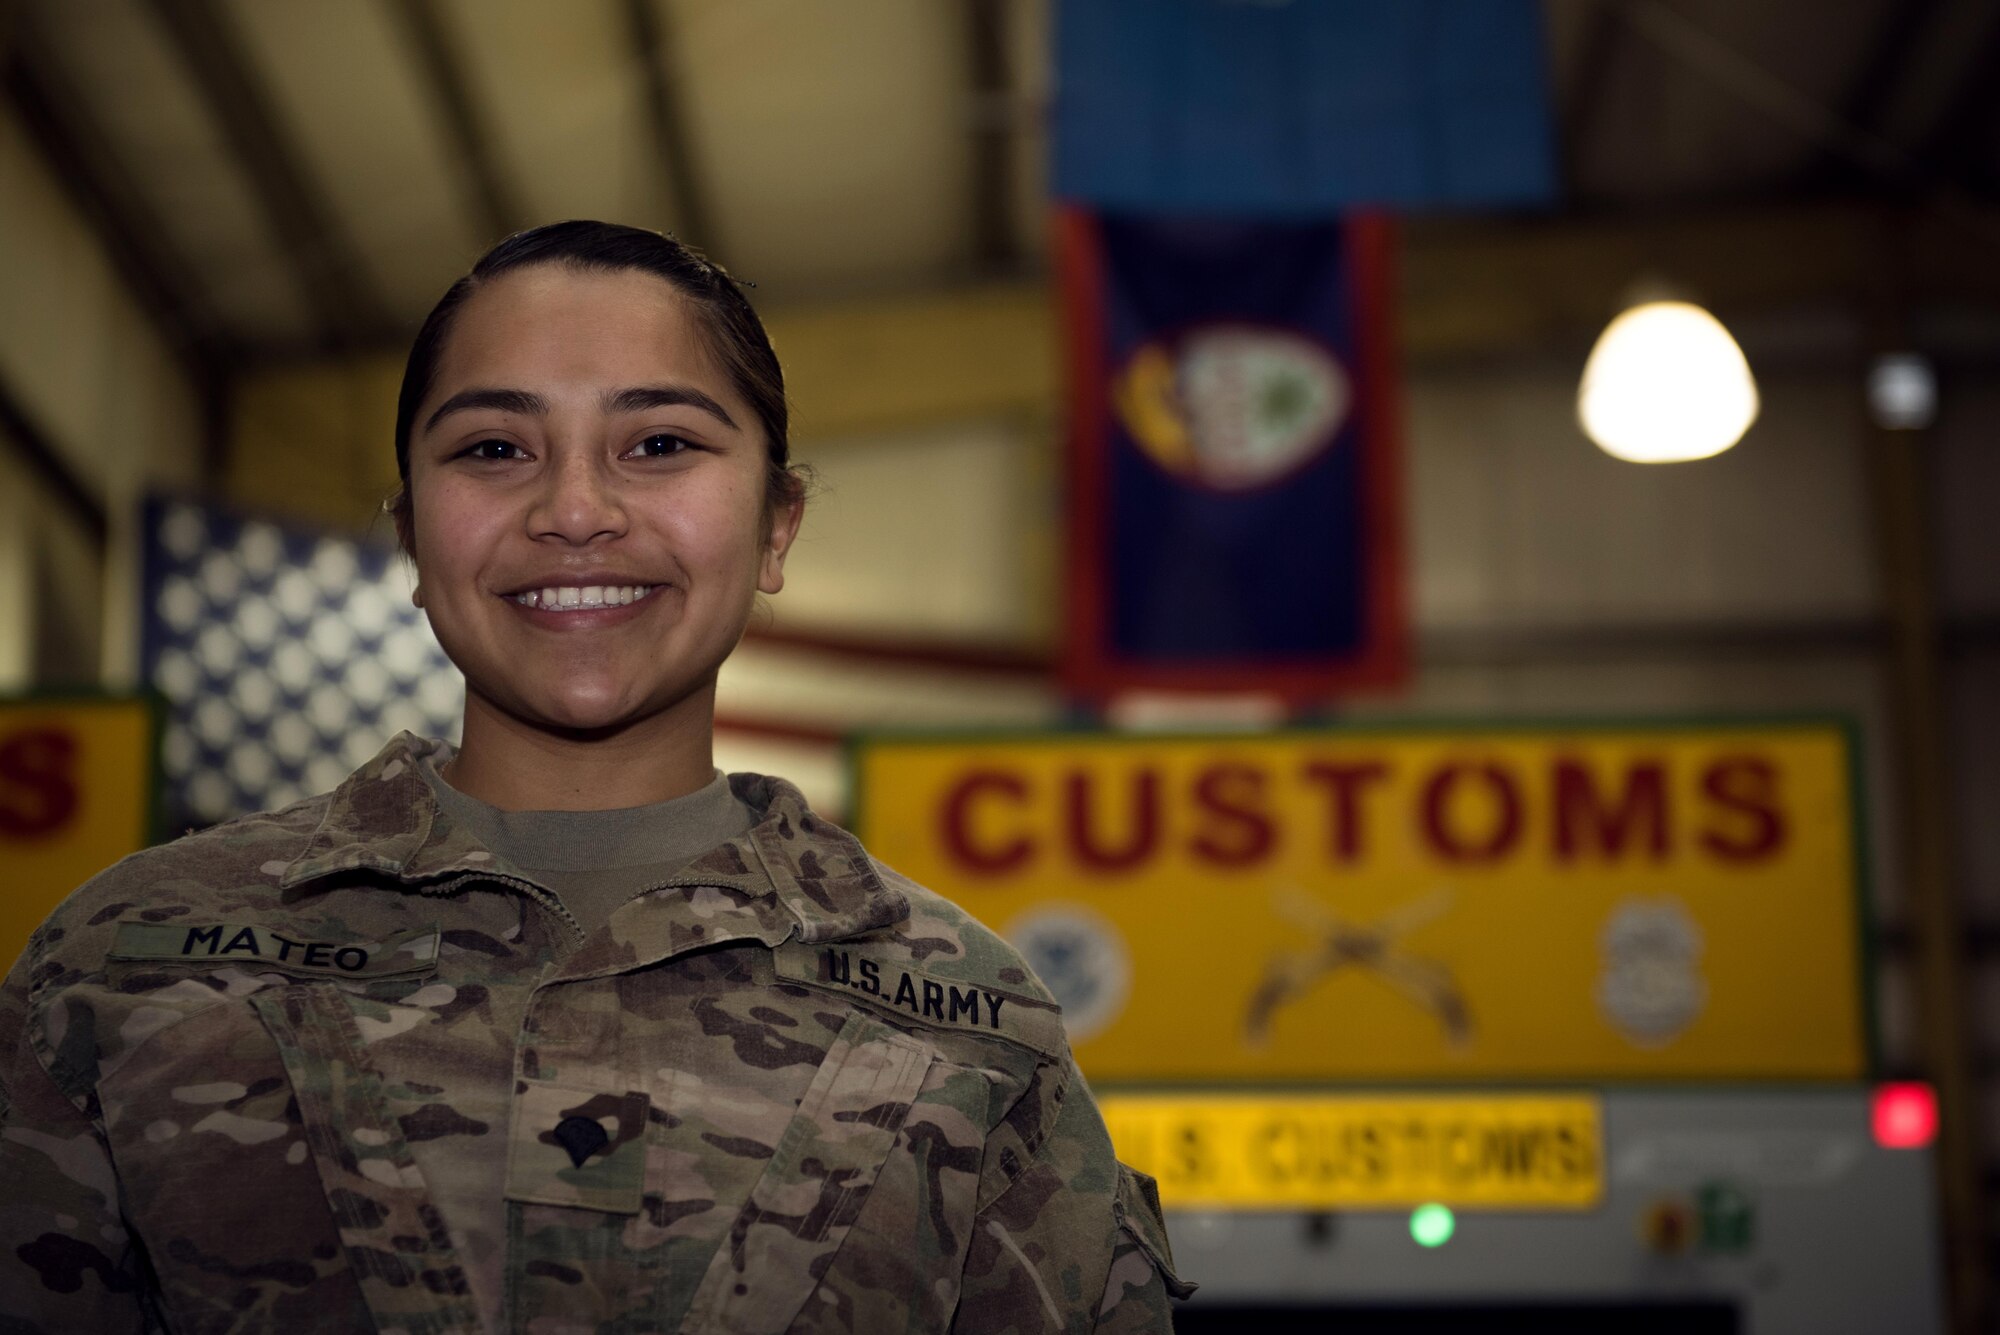 U.S. Army Spc. Michelle Mateo is deployed to Bagram Airfield, Afghanistan, as a customs agent for the base. She is assigned to the 368th Military Police Company, which is located on Guam, a 210-square-mile island in the middle of the Pacific Ocean. As a customs agent, Mateo inspected personnel and cargo leaving Afghanistan and the Central Command area of responsibility. (U.S. Air Force photo by Staff Sgt. Benjamin Gonsier)